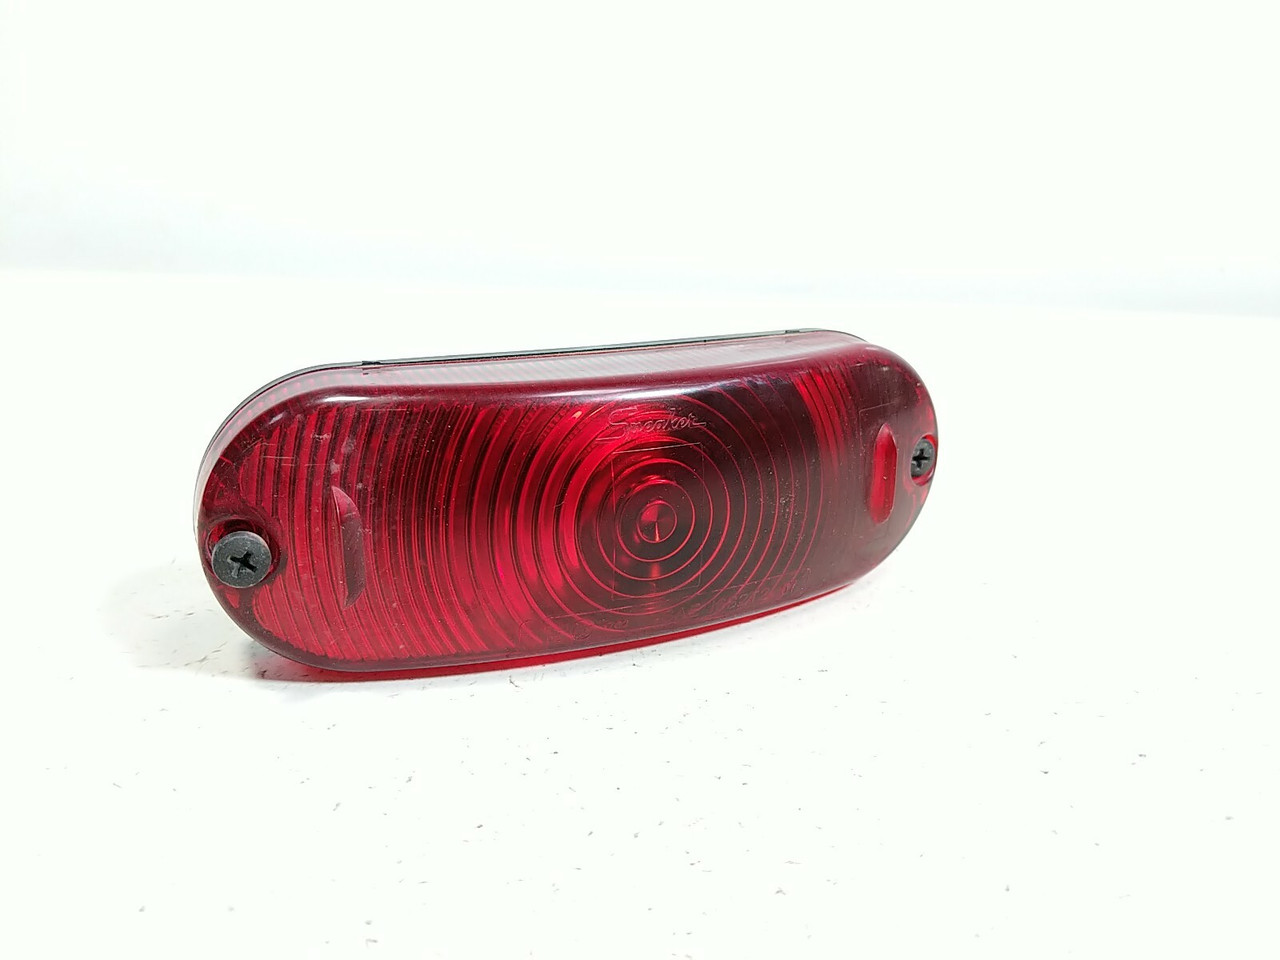 17 Textron Stampede 900 Rear Tail Brake Light Lamp Taillight A552